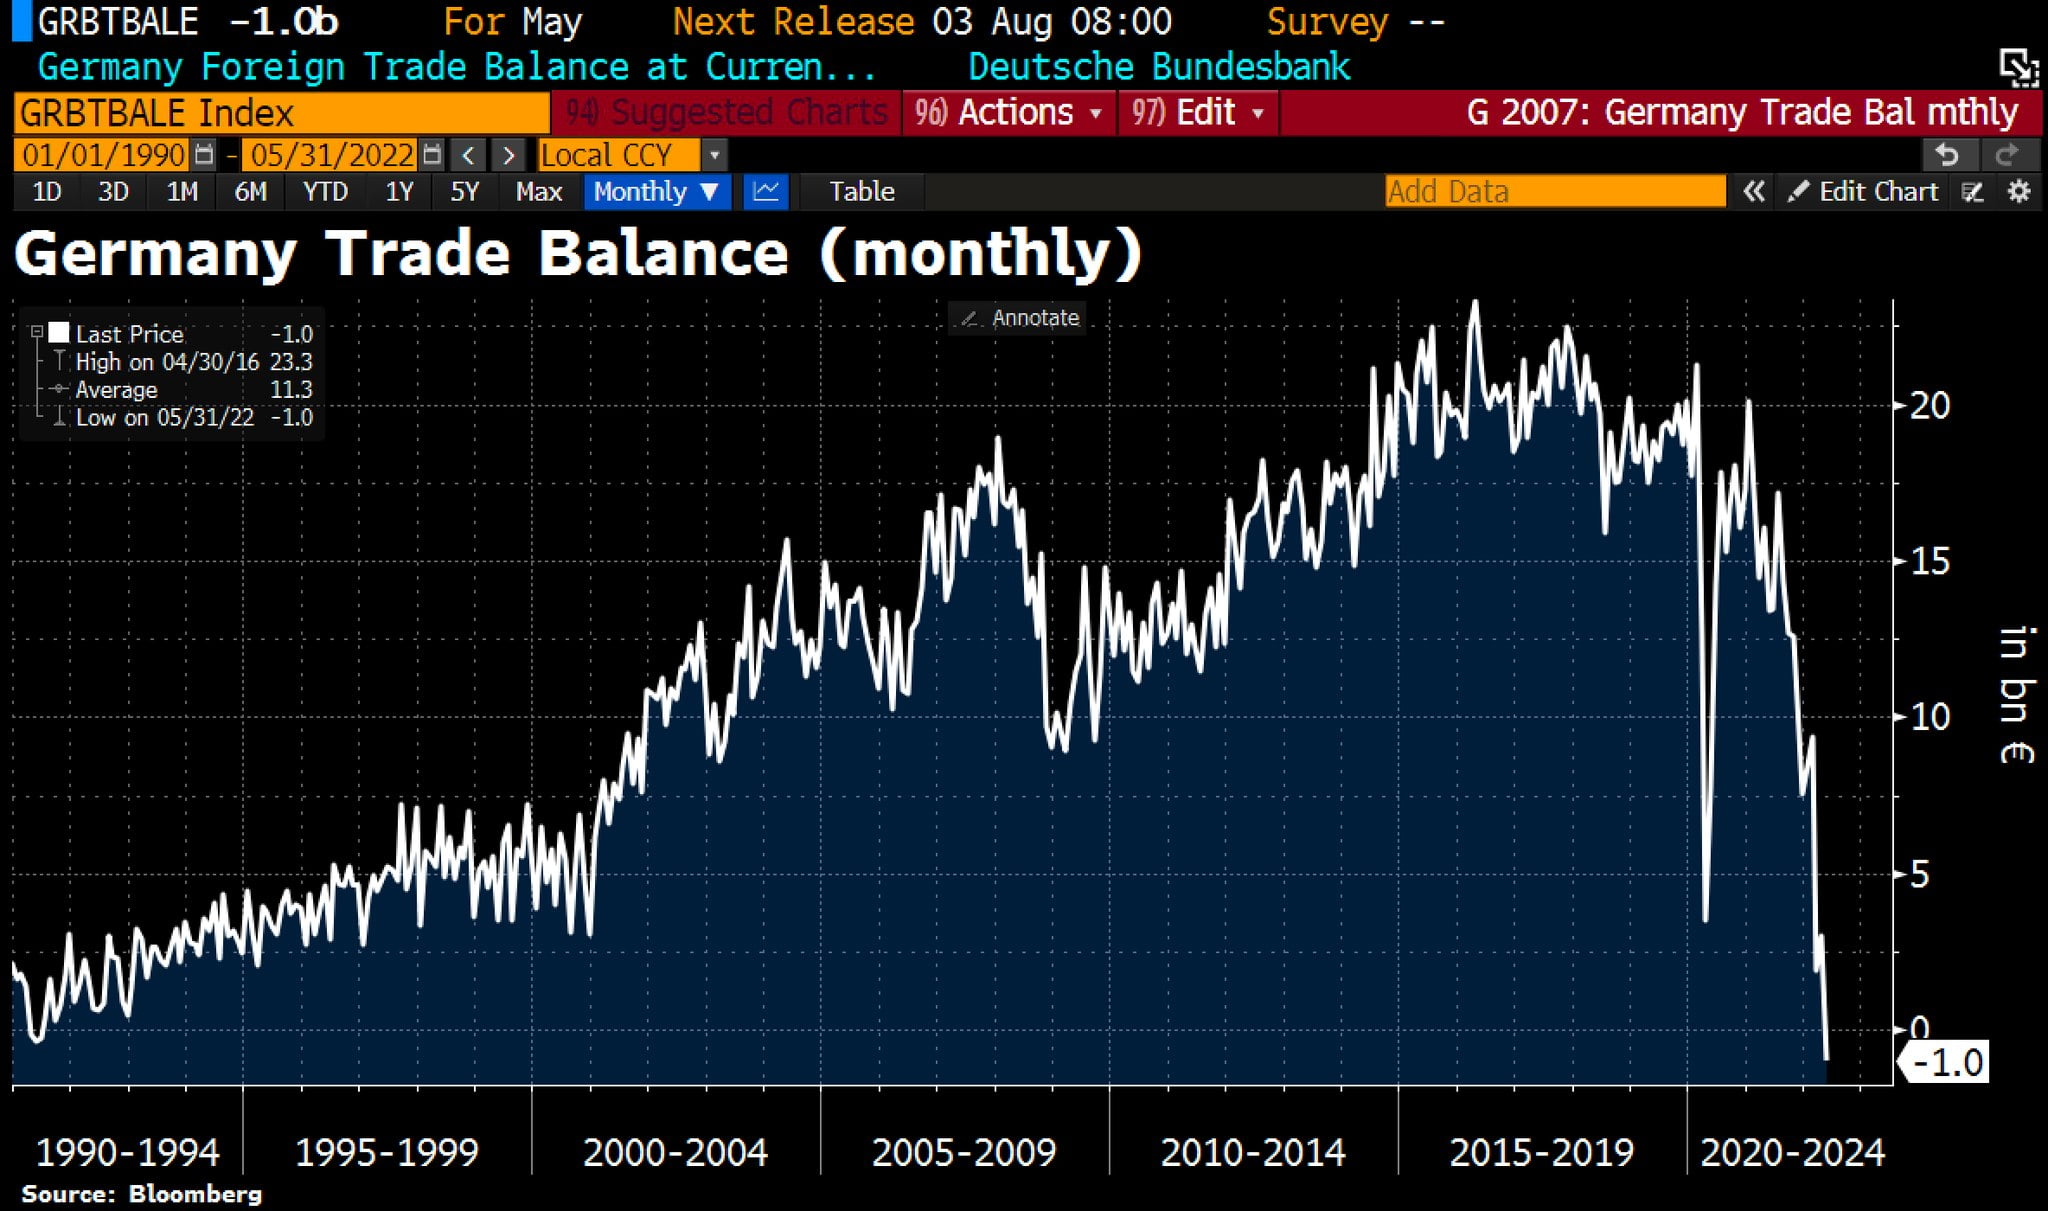 German trade balance, they did it to themselves